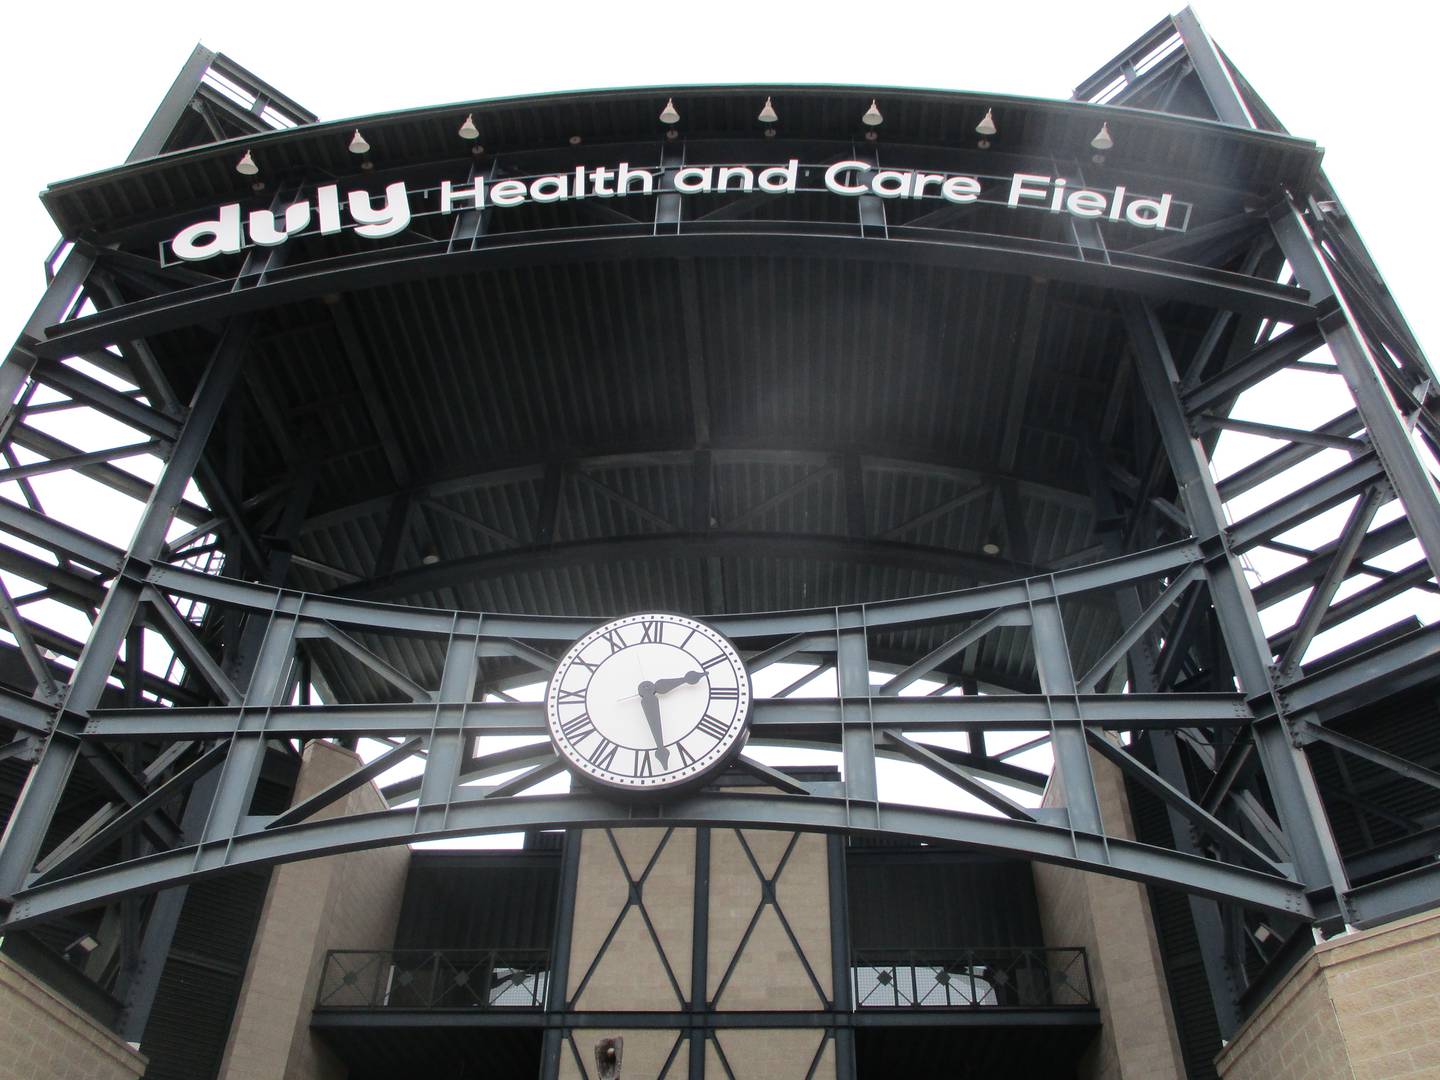 The Joliet Slammers play their home games at Duly Health and Care Field. Jan. 21, 2023.